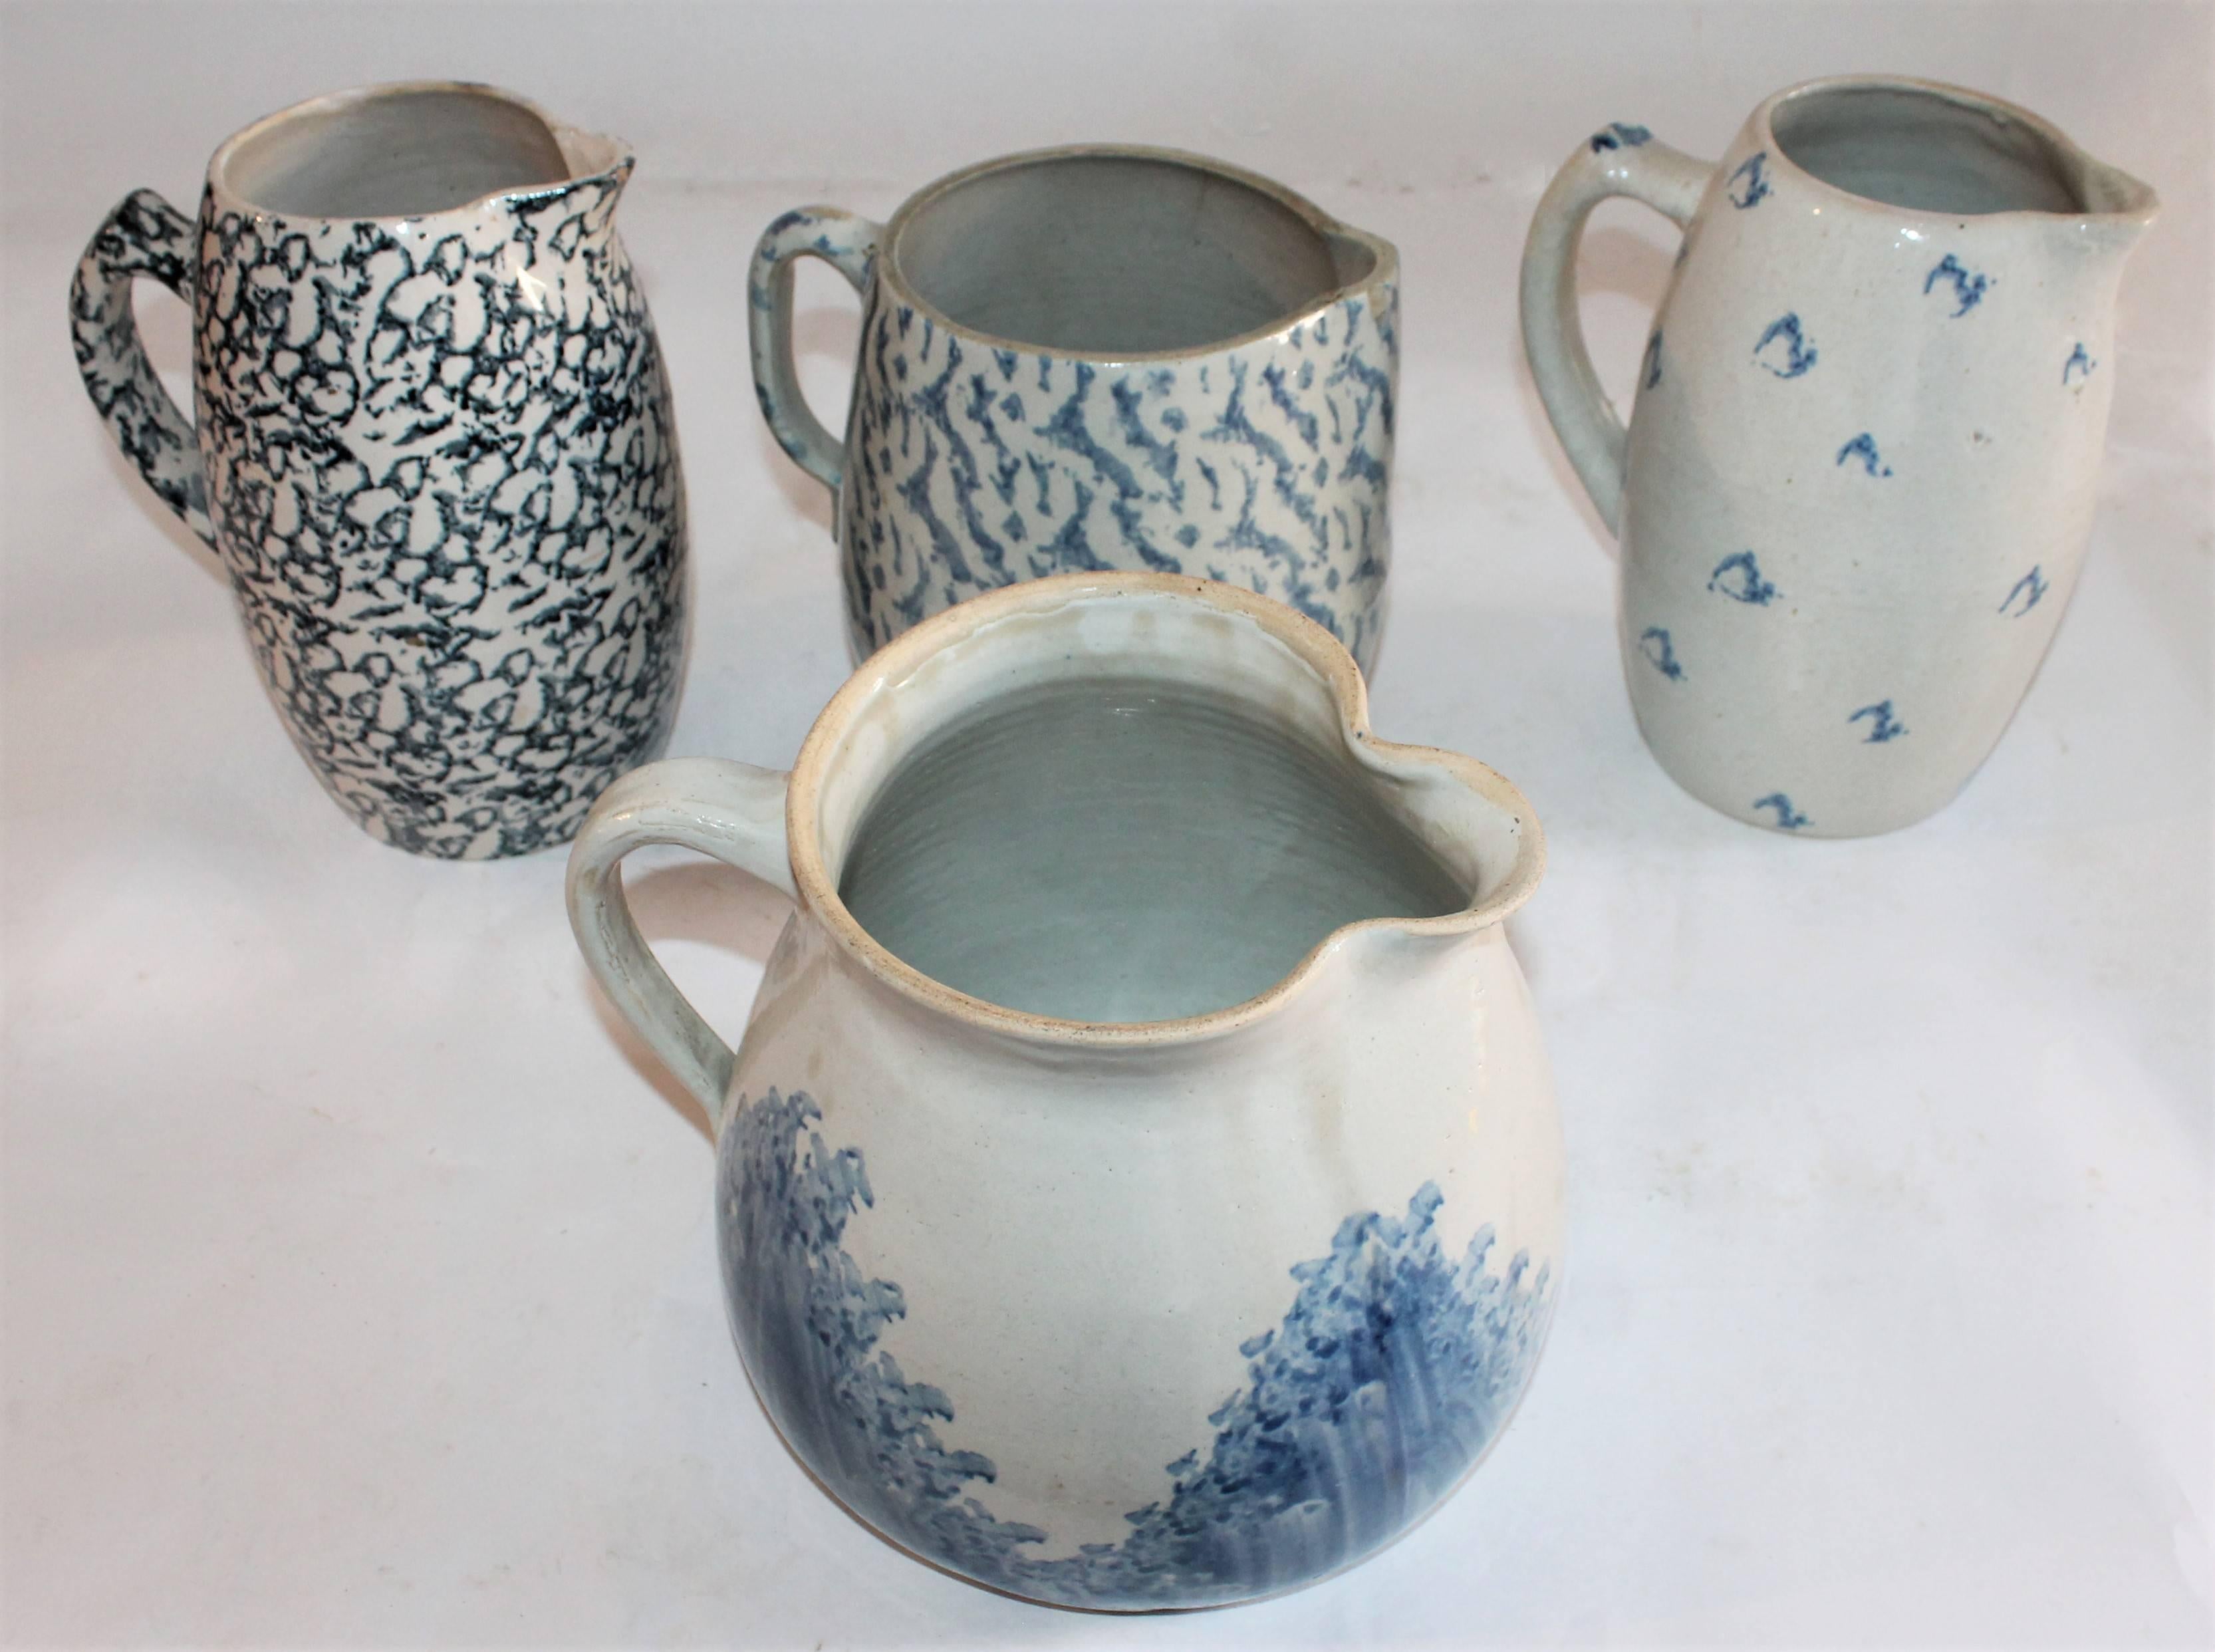 American Collection of Four 19th Century Sponge Ware Pottery Pitchers